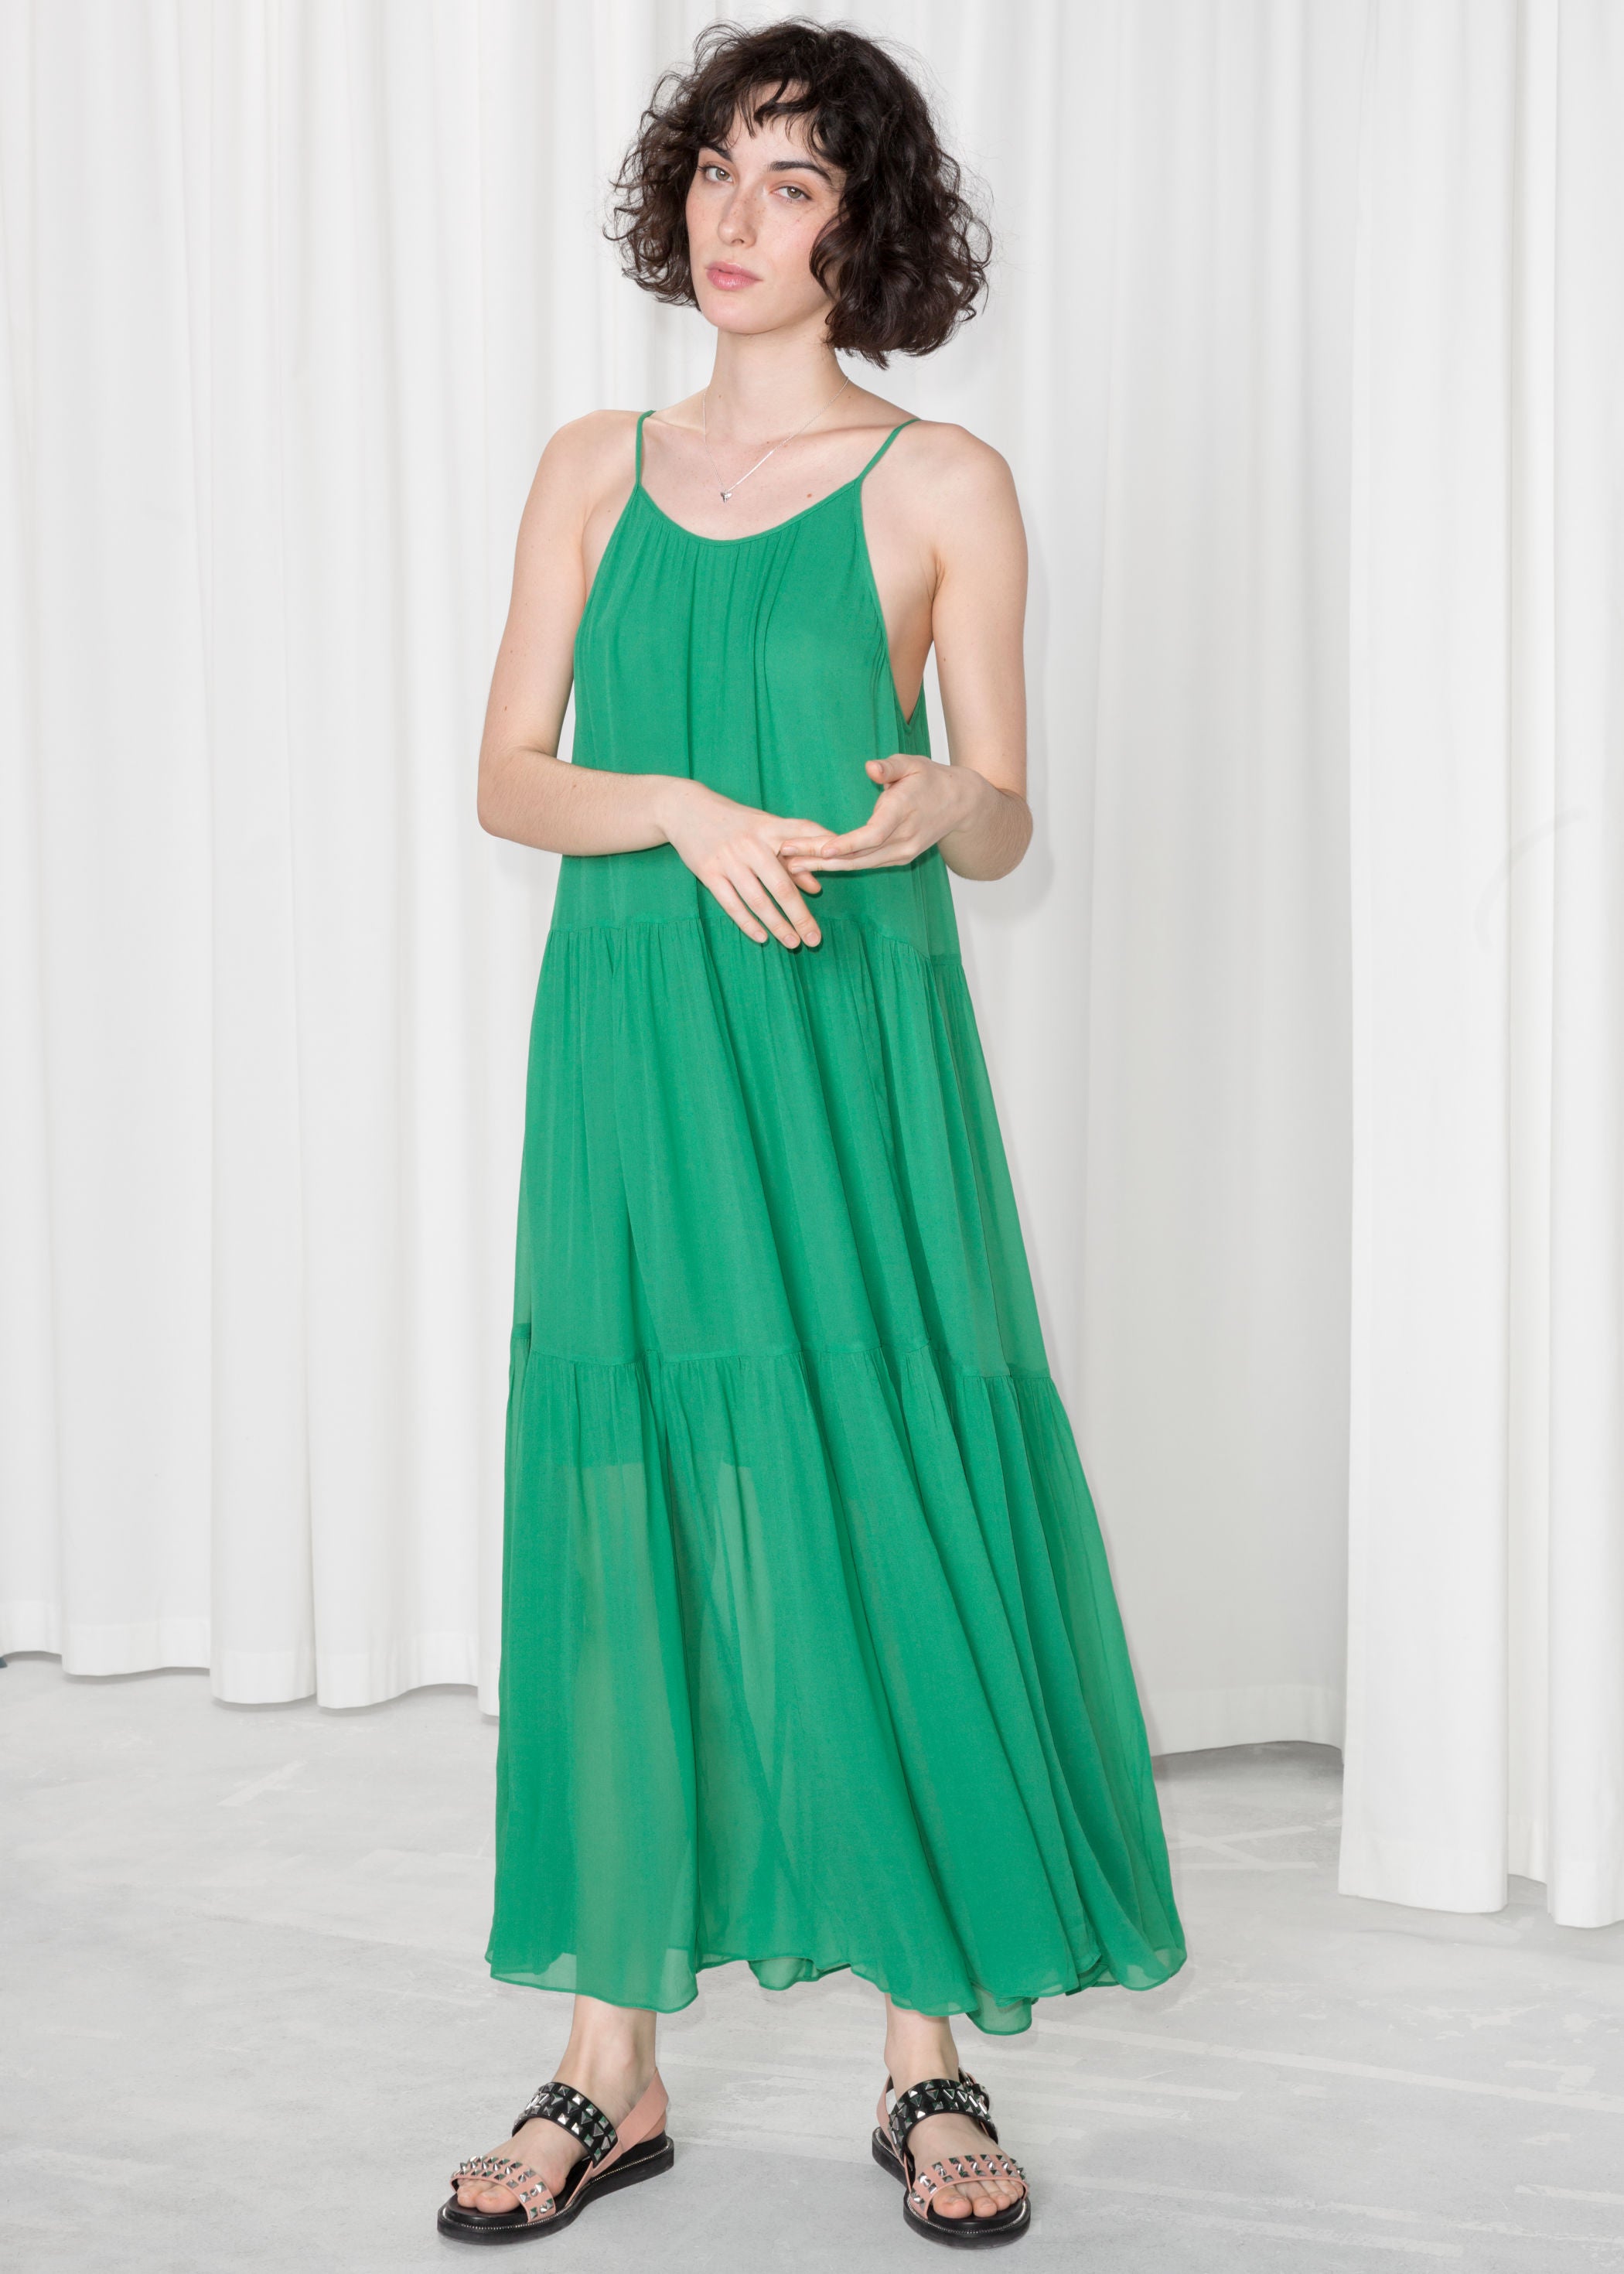 & Other Stories apple green tiered maxi dress